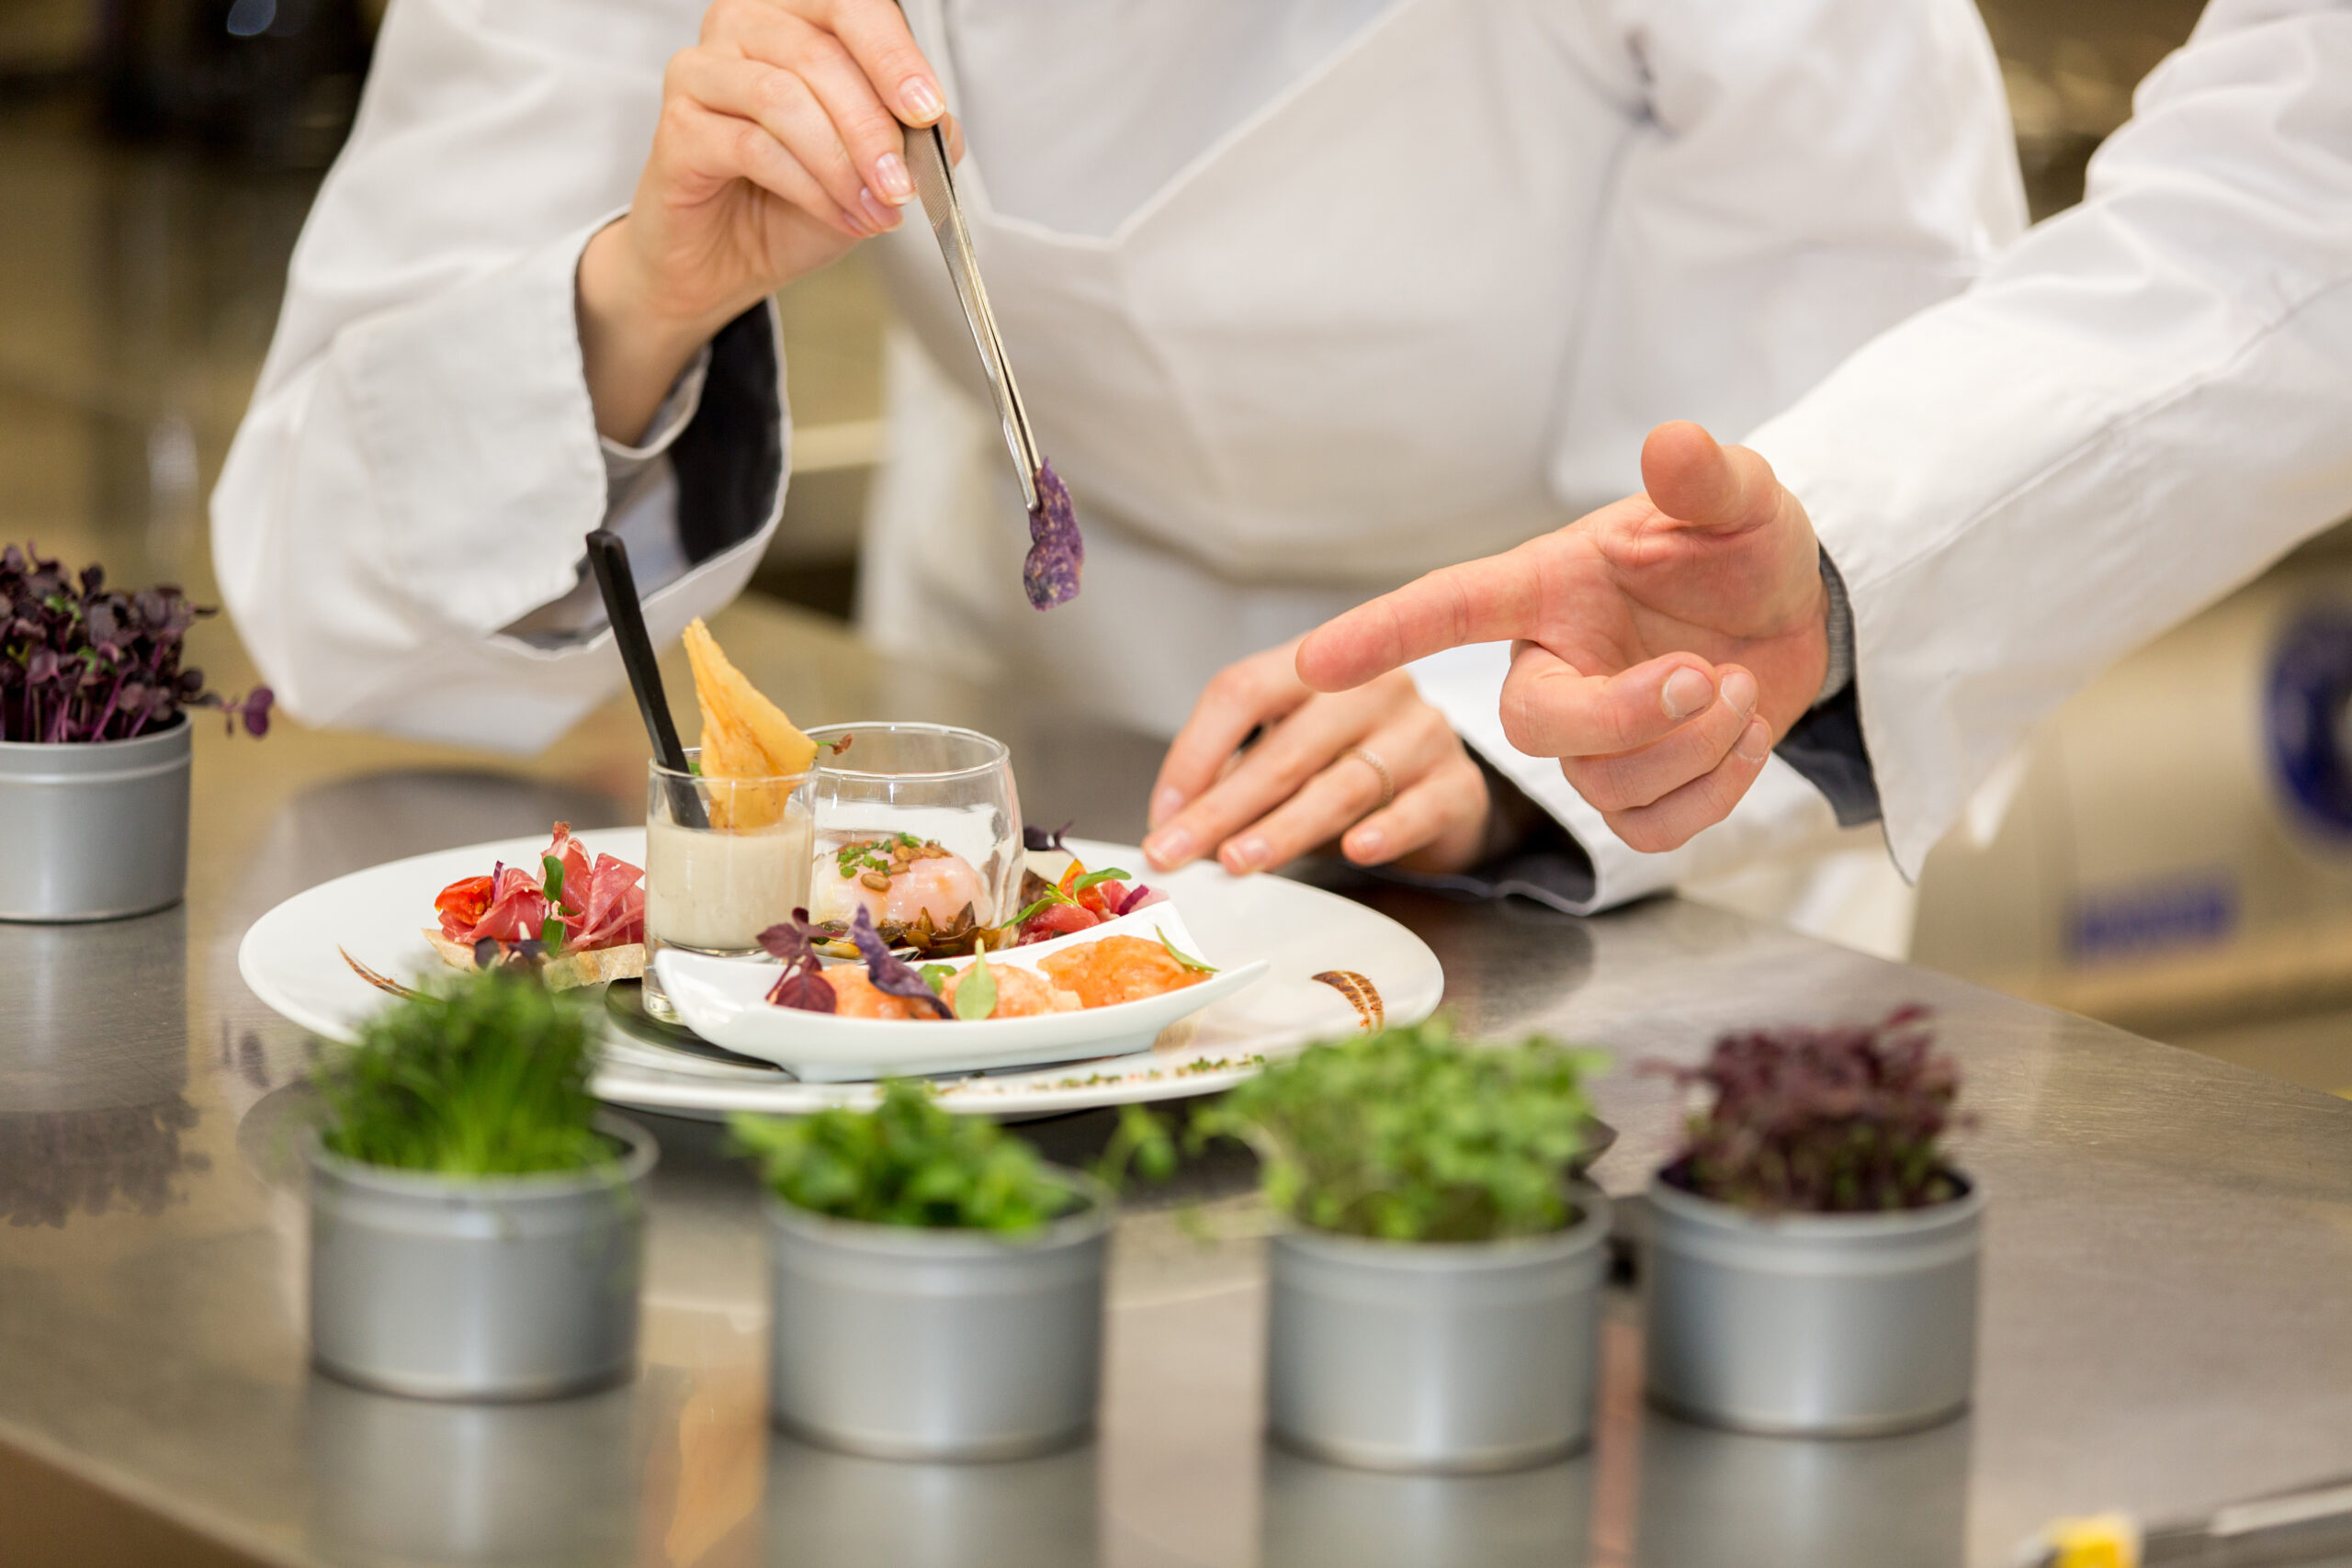 Top 5 Most Compelling Tips for Effective Restaurant Staff Management